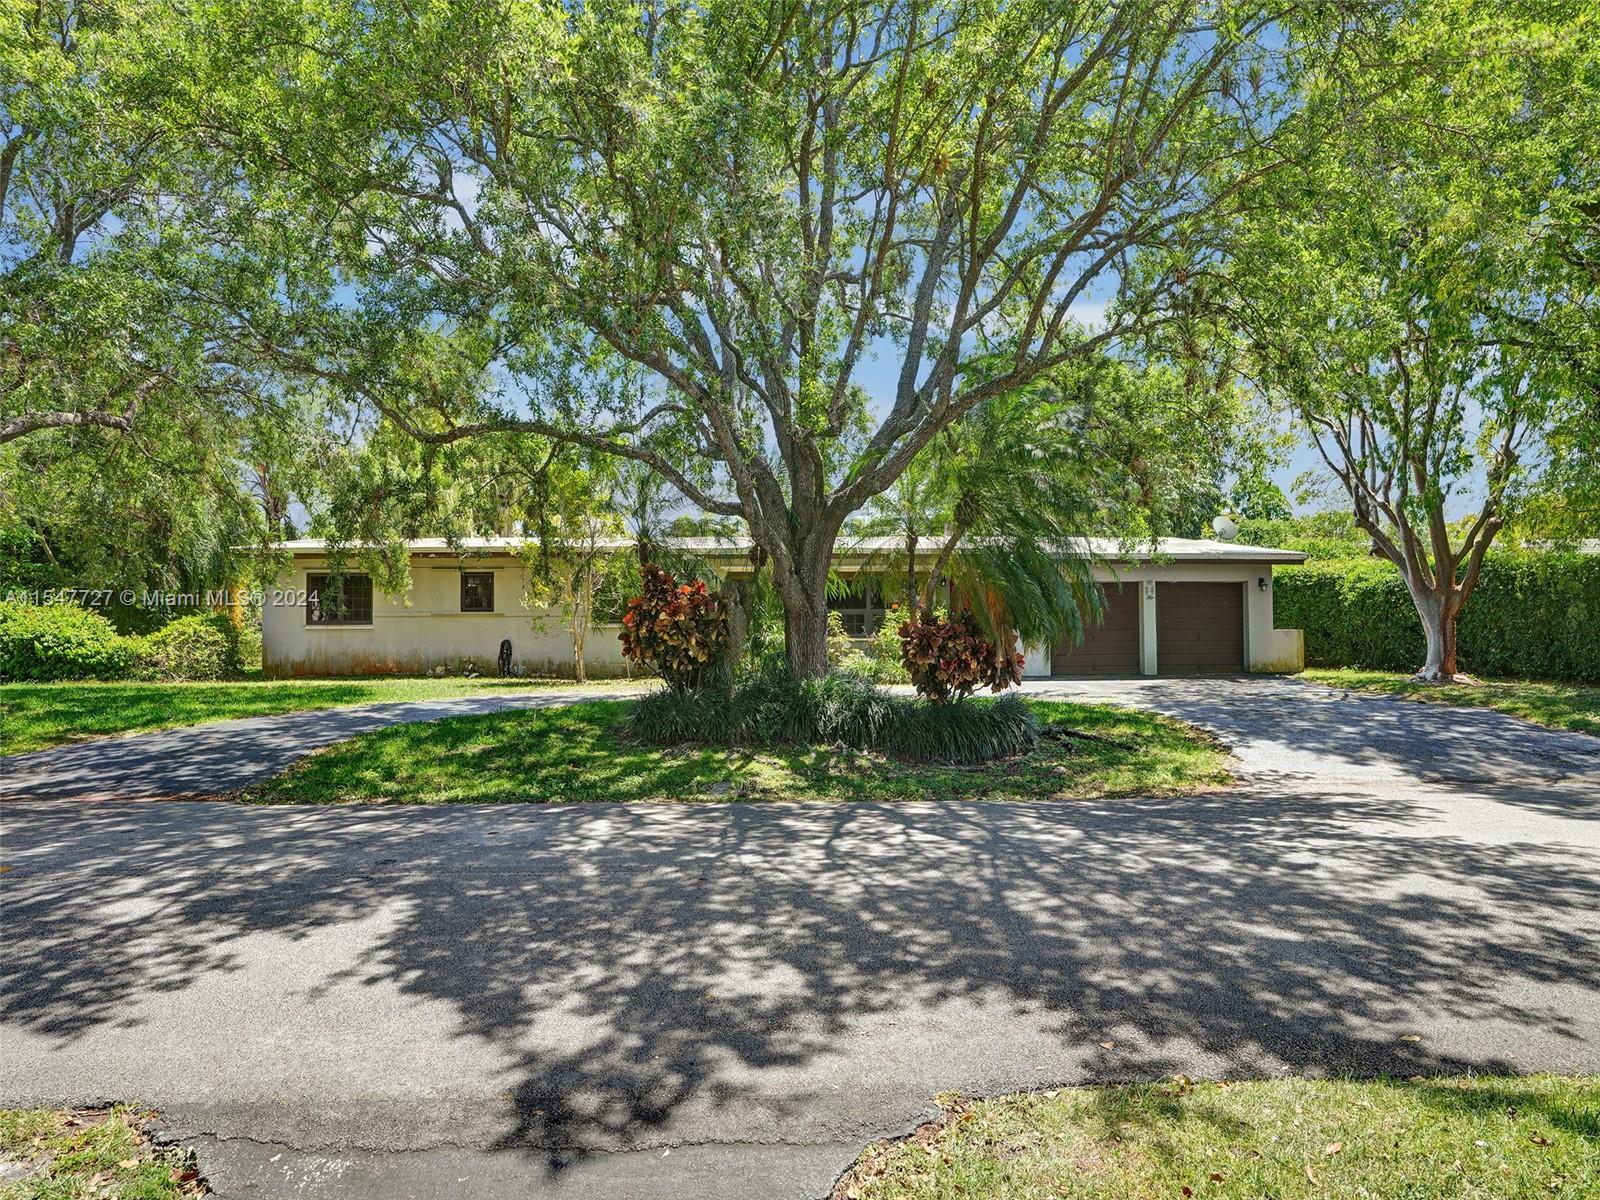 9200 SW 125th Ter, Miami, Florida 33176, 3 Bedrooms Bedrooms, ,3 BathroomsBathrooms,Residential,For Sale,9200 SW 125th Ter,A11547727